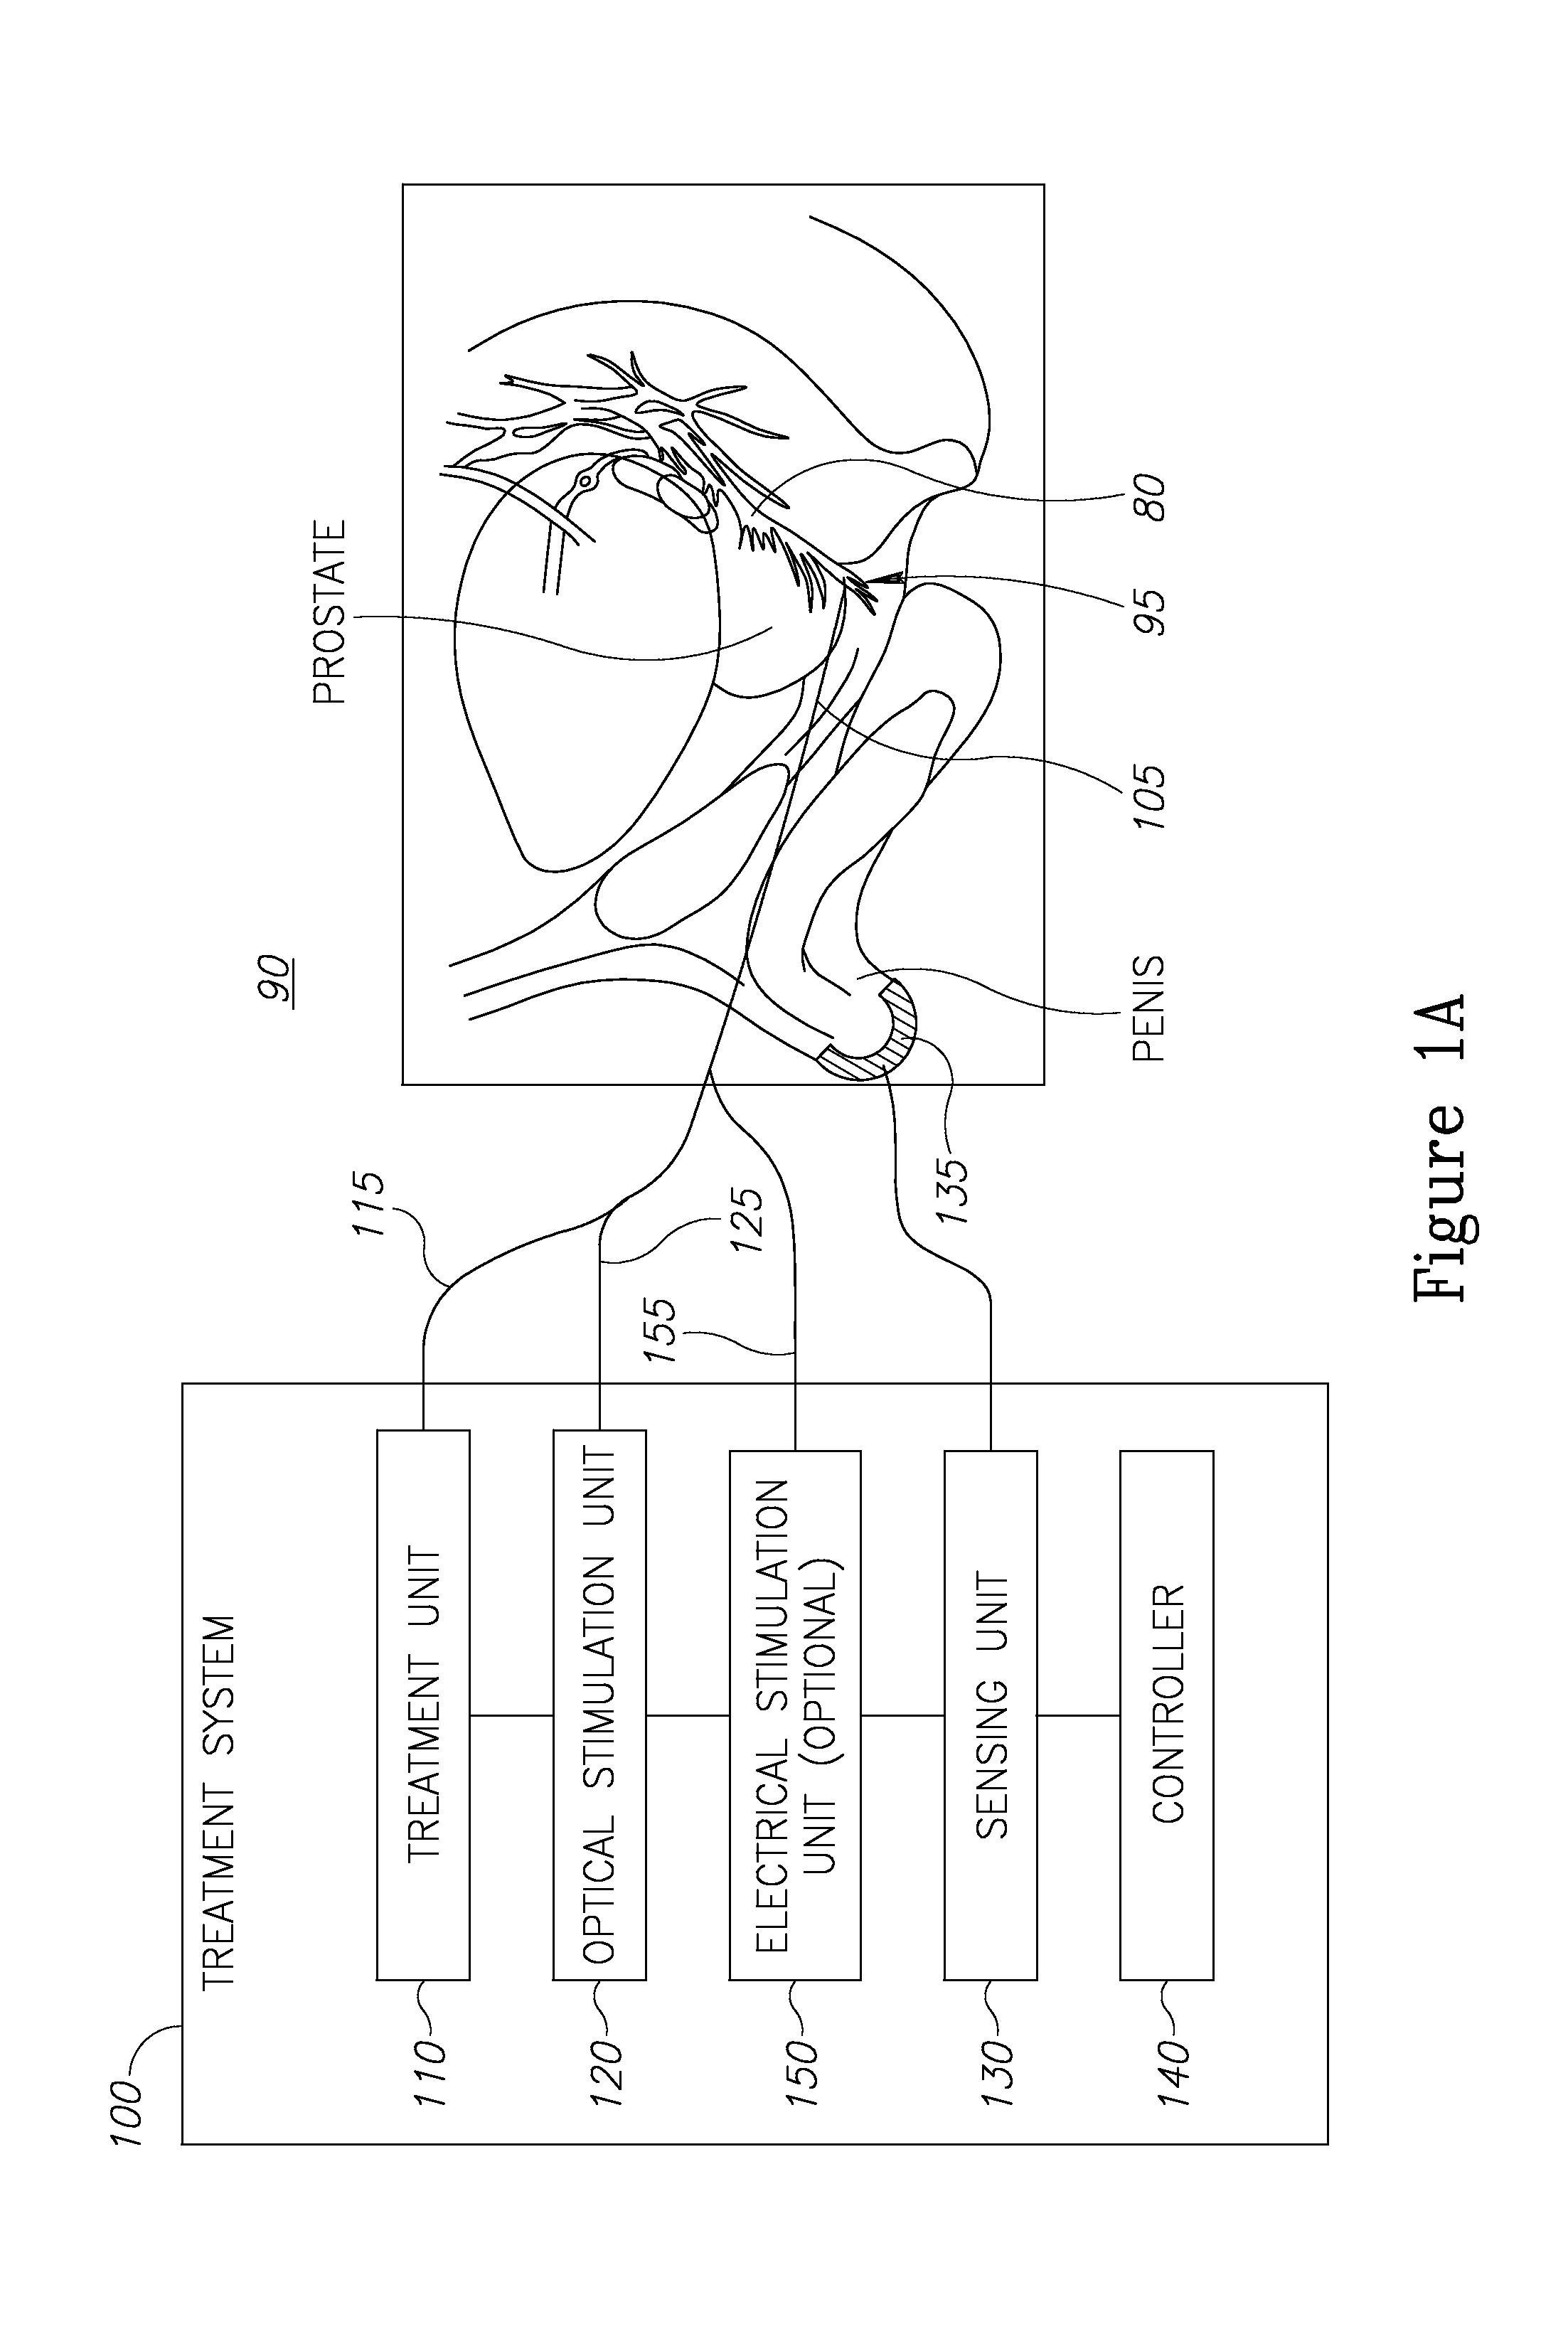 Nerve sparing treatment systems and methods